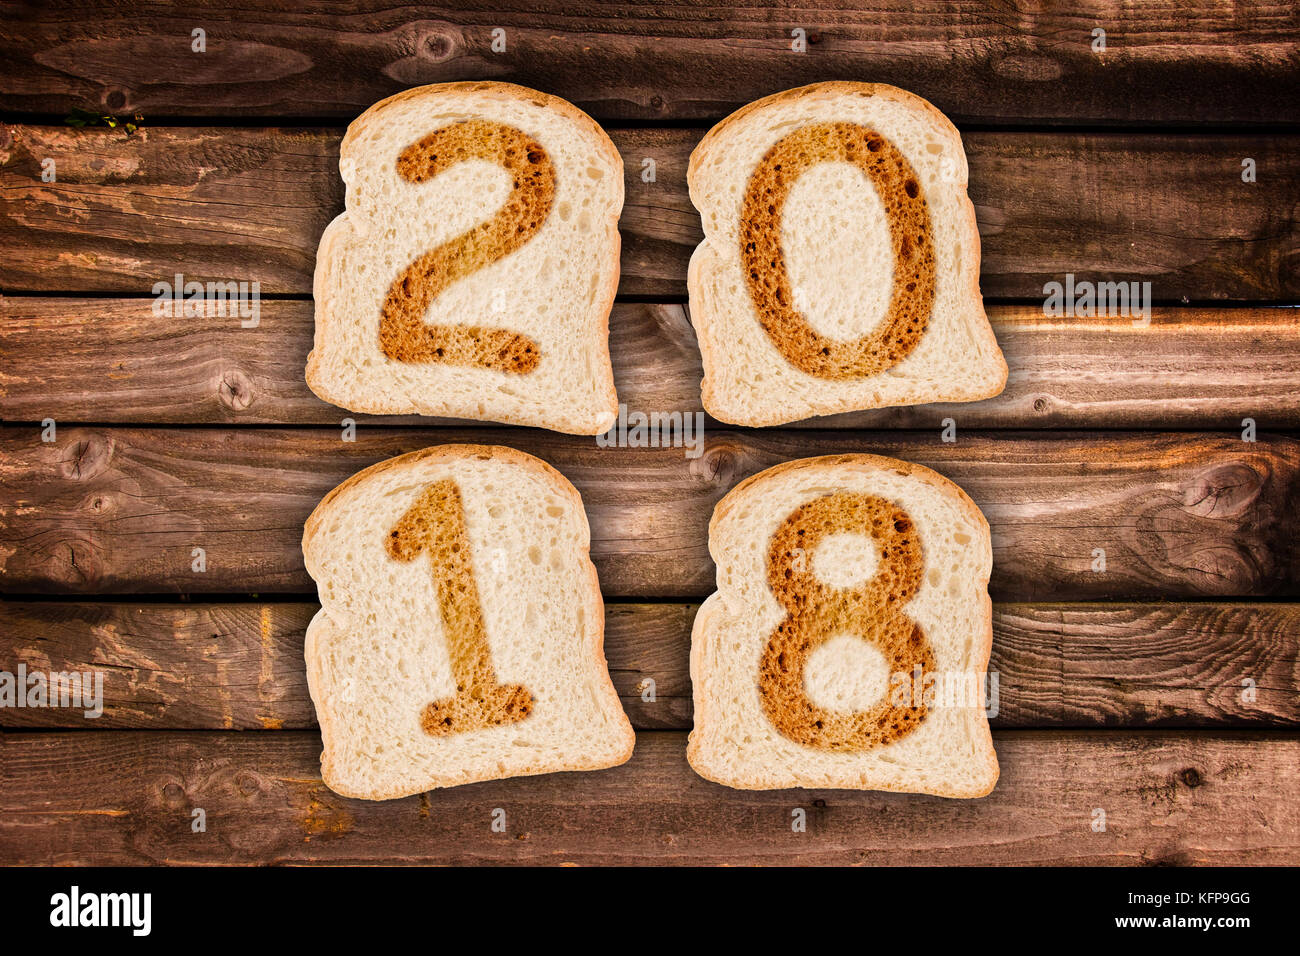 2018 greeting card toasted slices of bread on wooden planks background Stock Photo